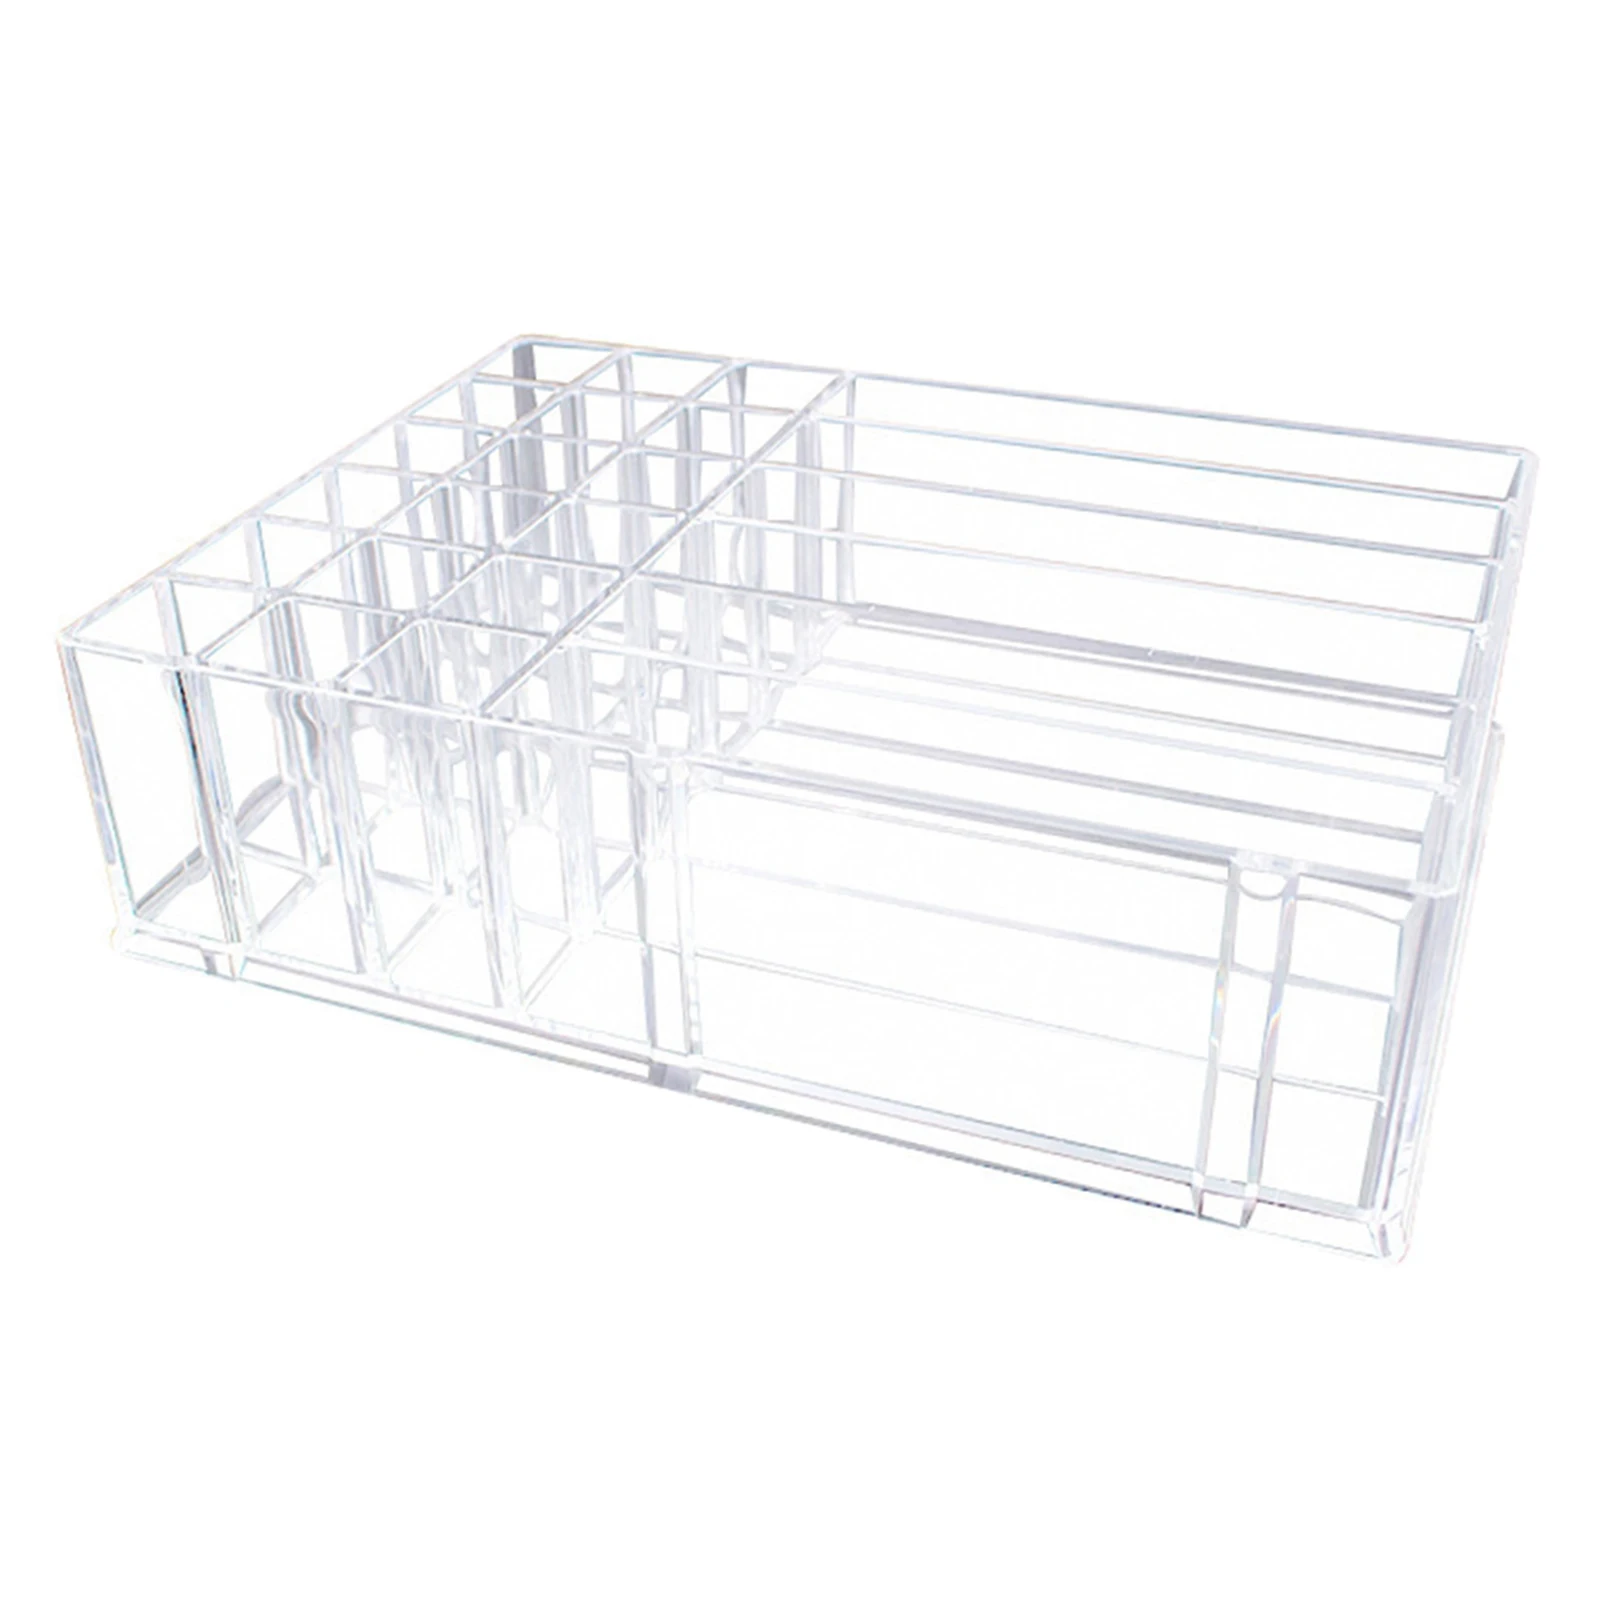 Acrylic Makeup Organizers and Storage Holder Make , can Adjust According Makeup and the Thickness of 